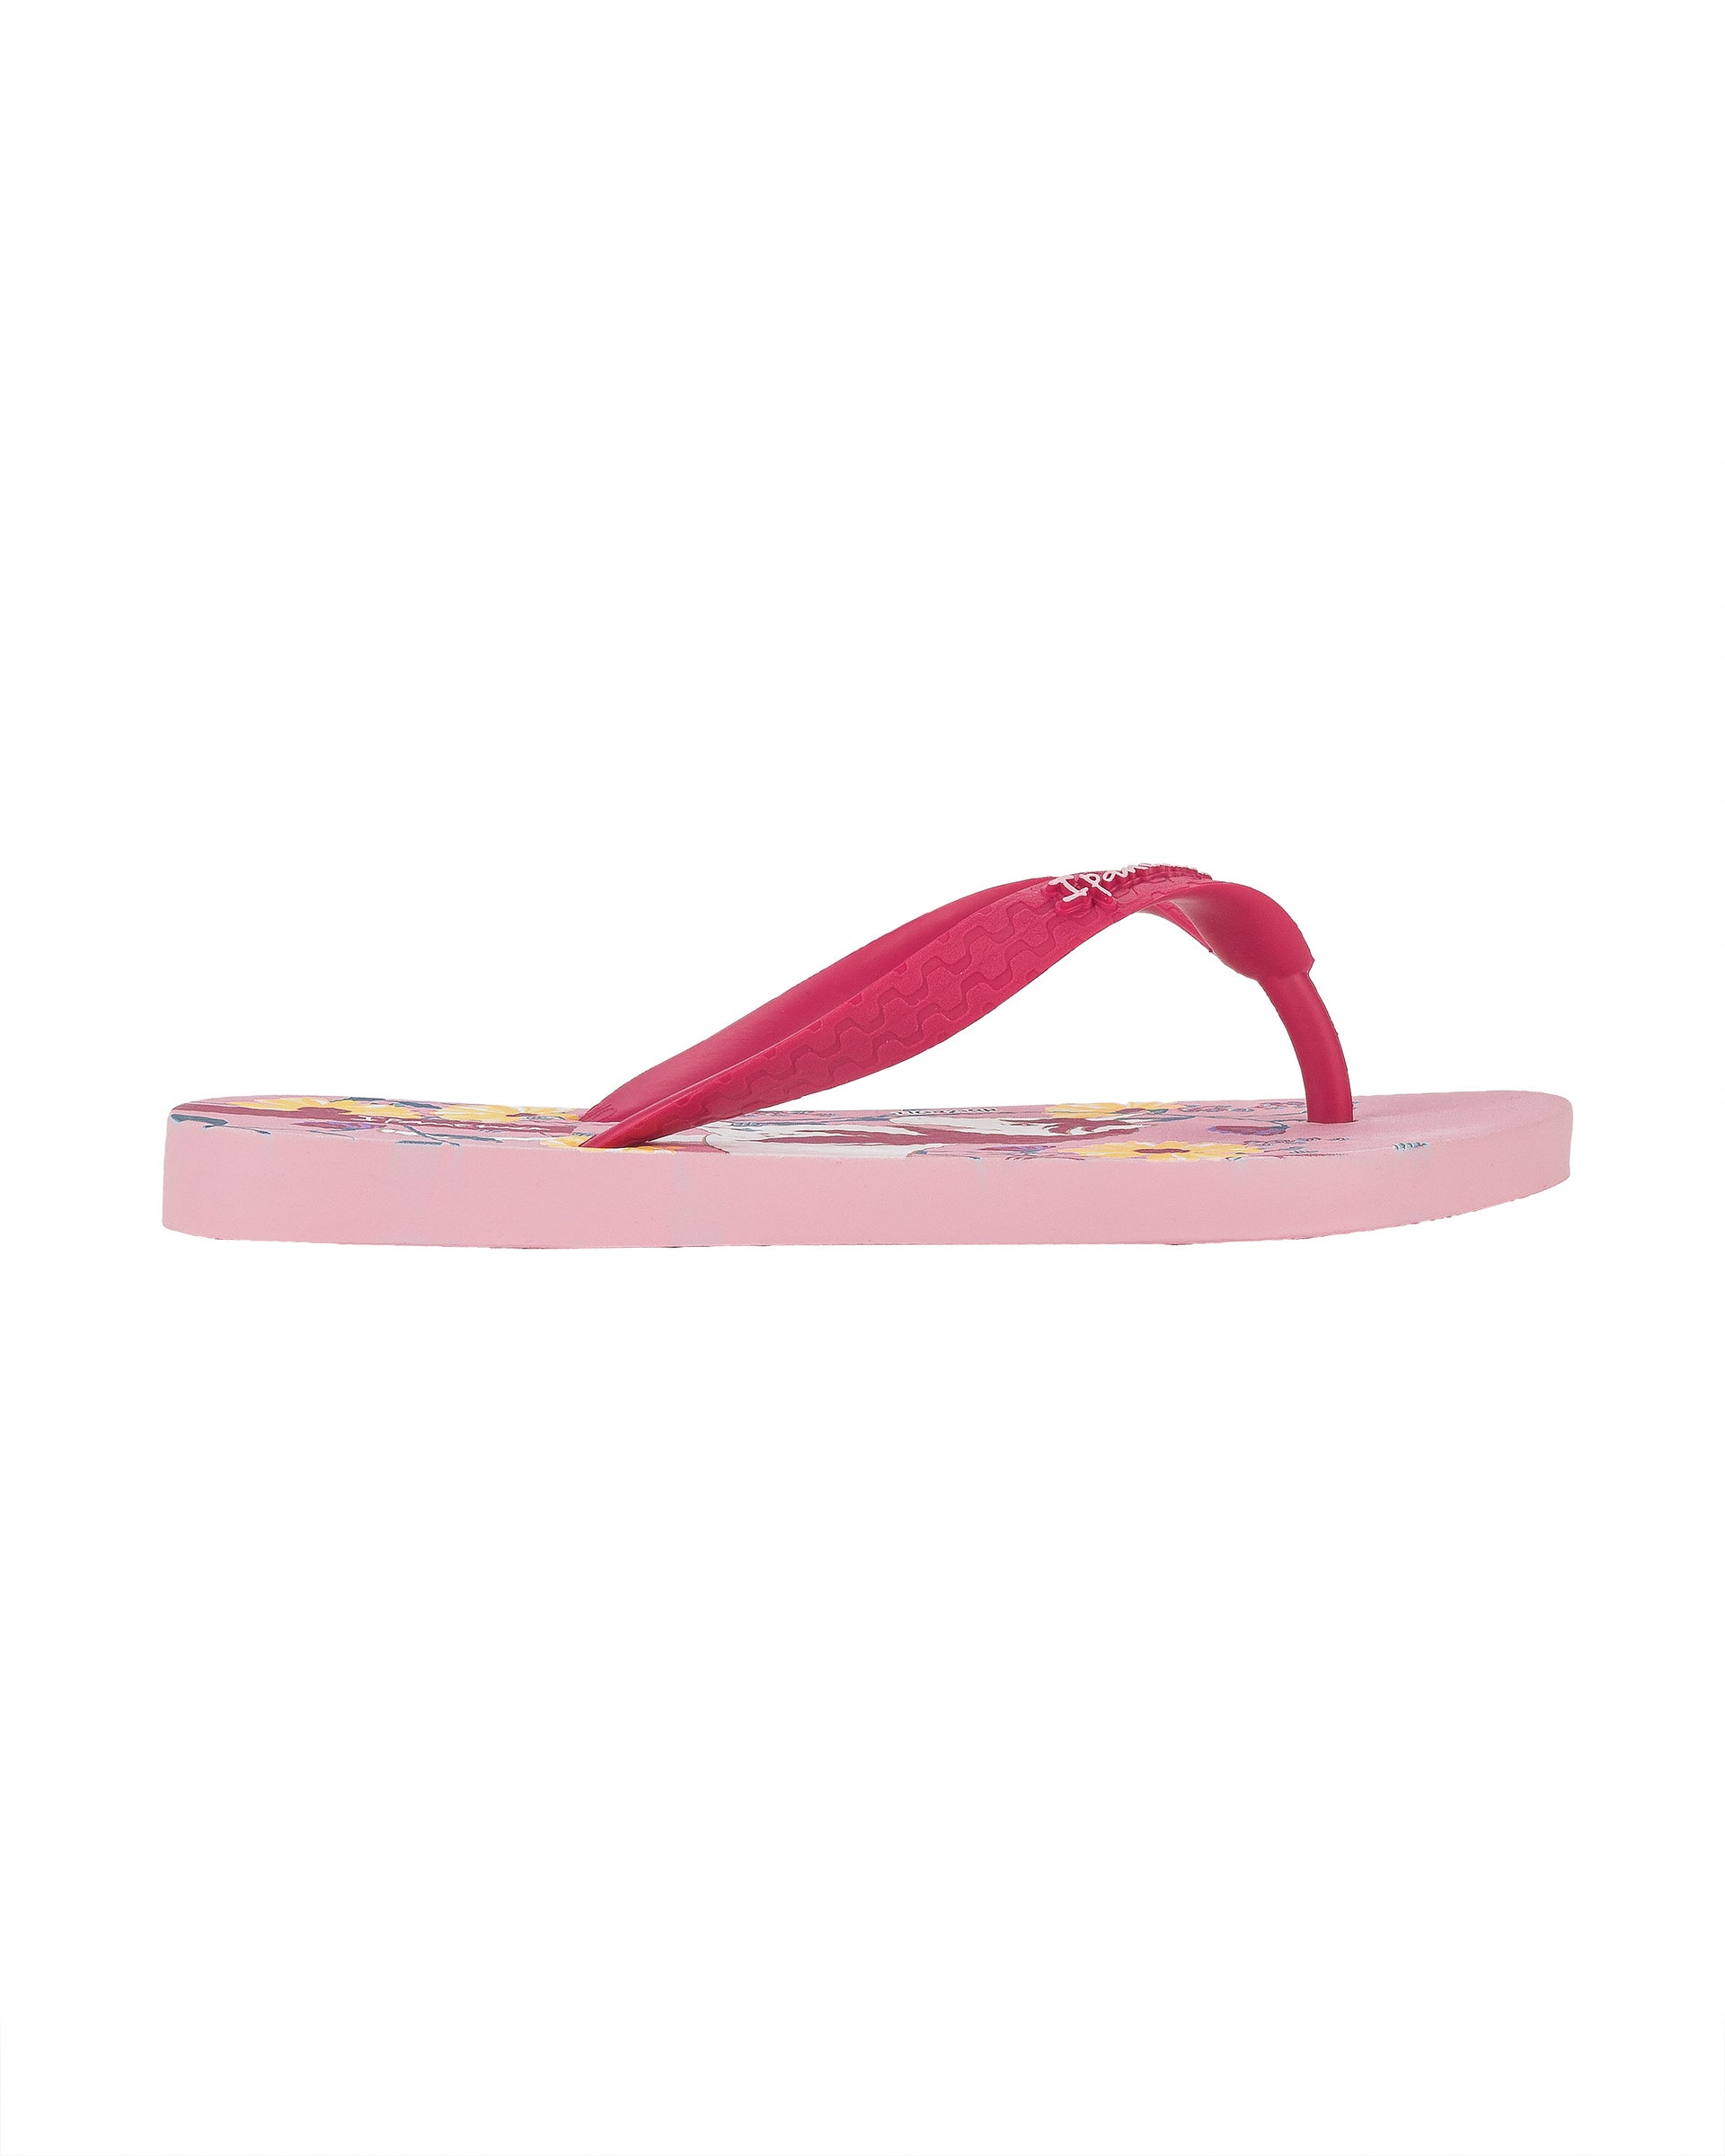 Outer side view of a pink Ipanema Temas kids flip flop with unicorn and flower print.